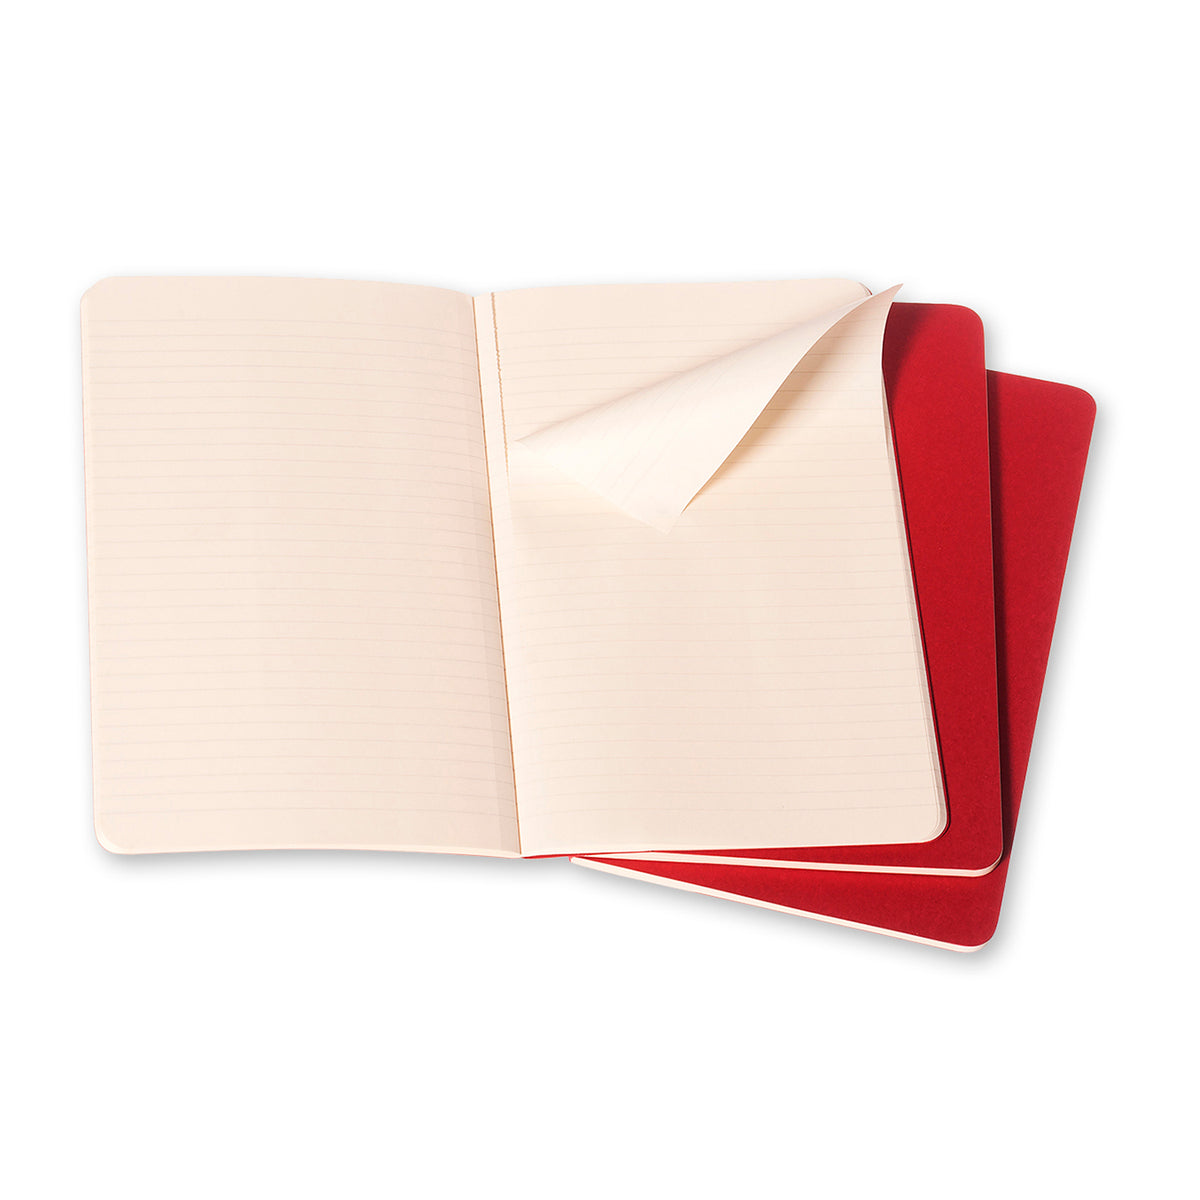 Moleskine - Cahier Notebook - Set of 3 - Ruled - Large - Cranberry Red